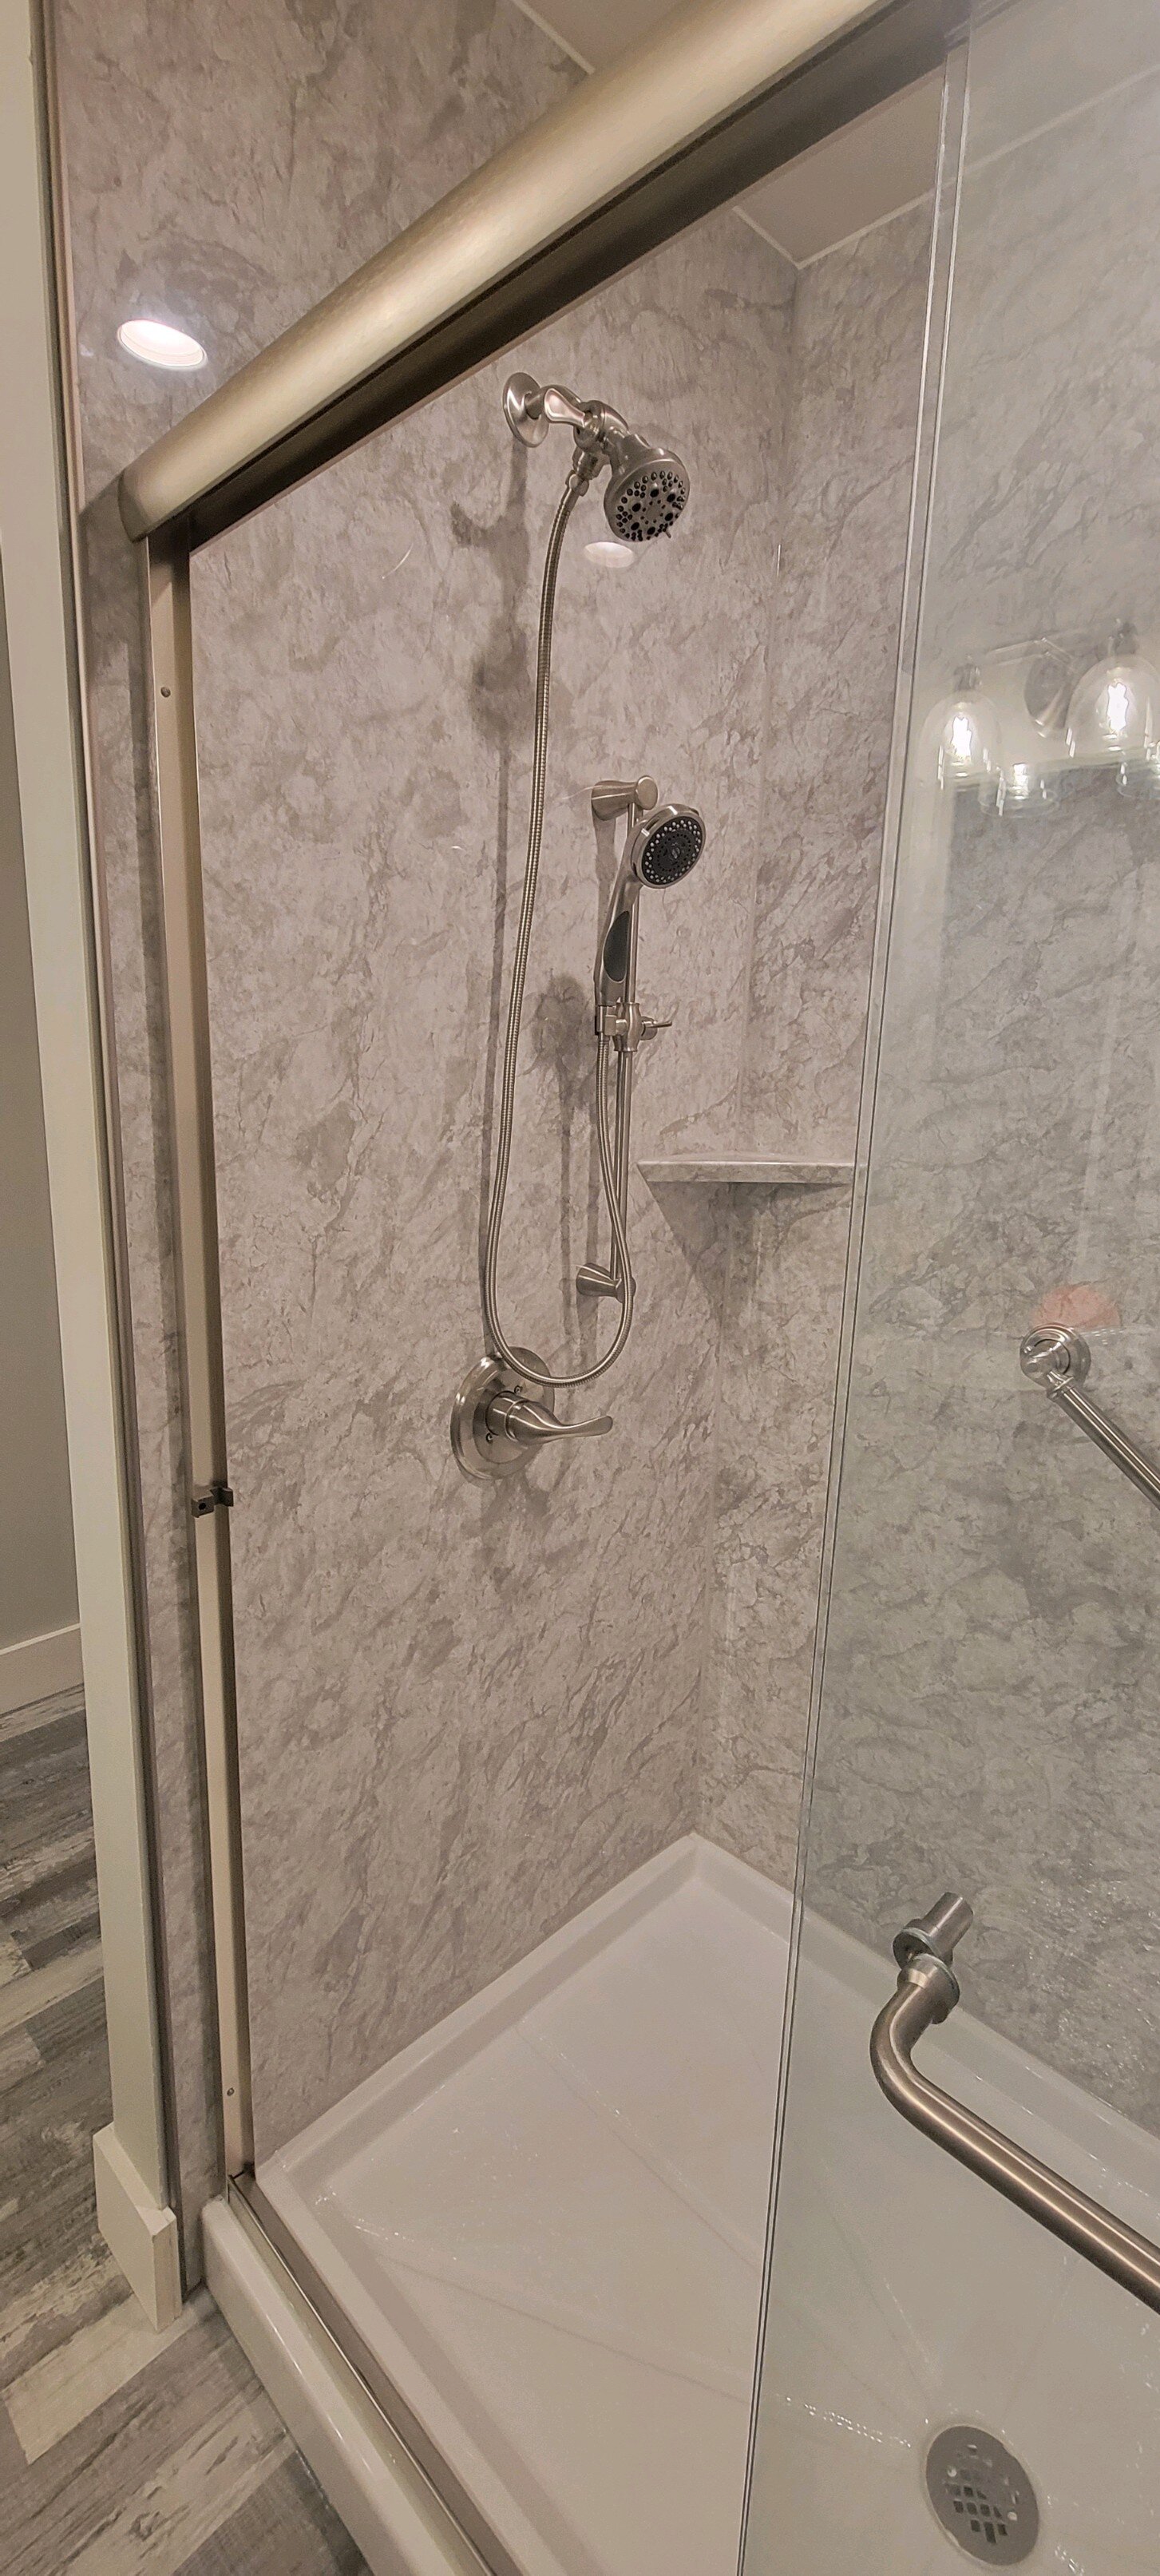 After, Mounted shower head and removable shower head in brushed nickle 